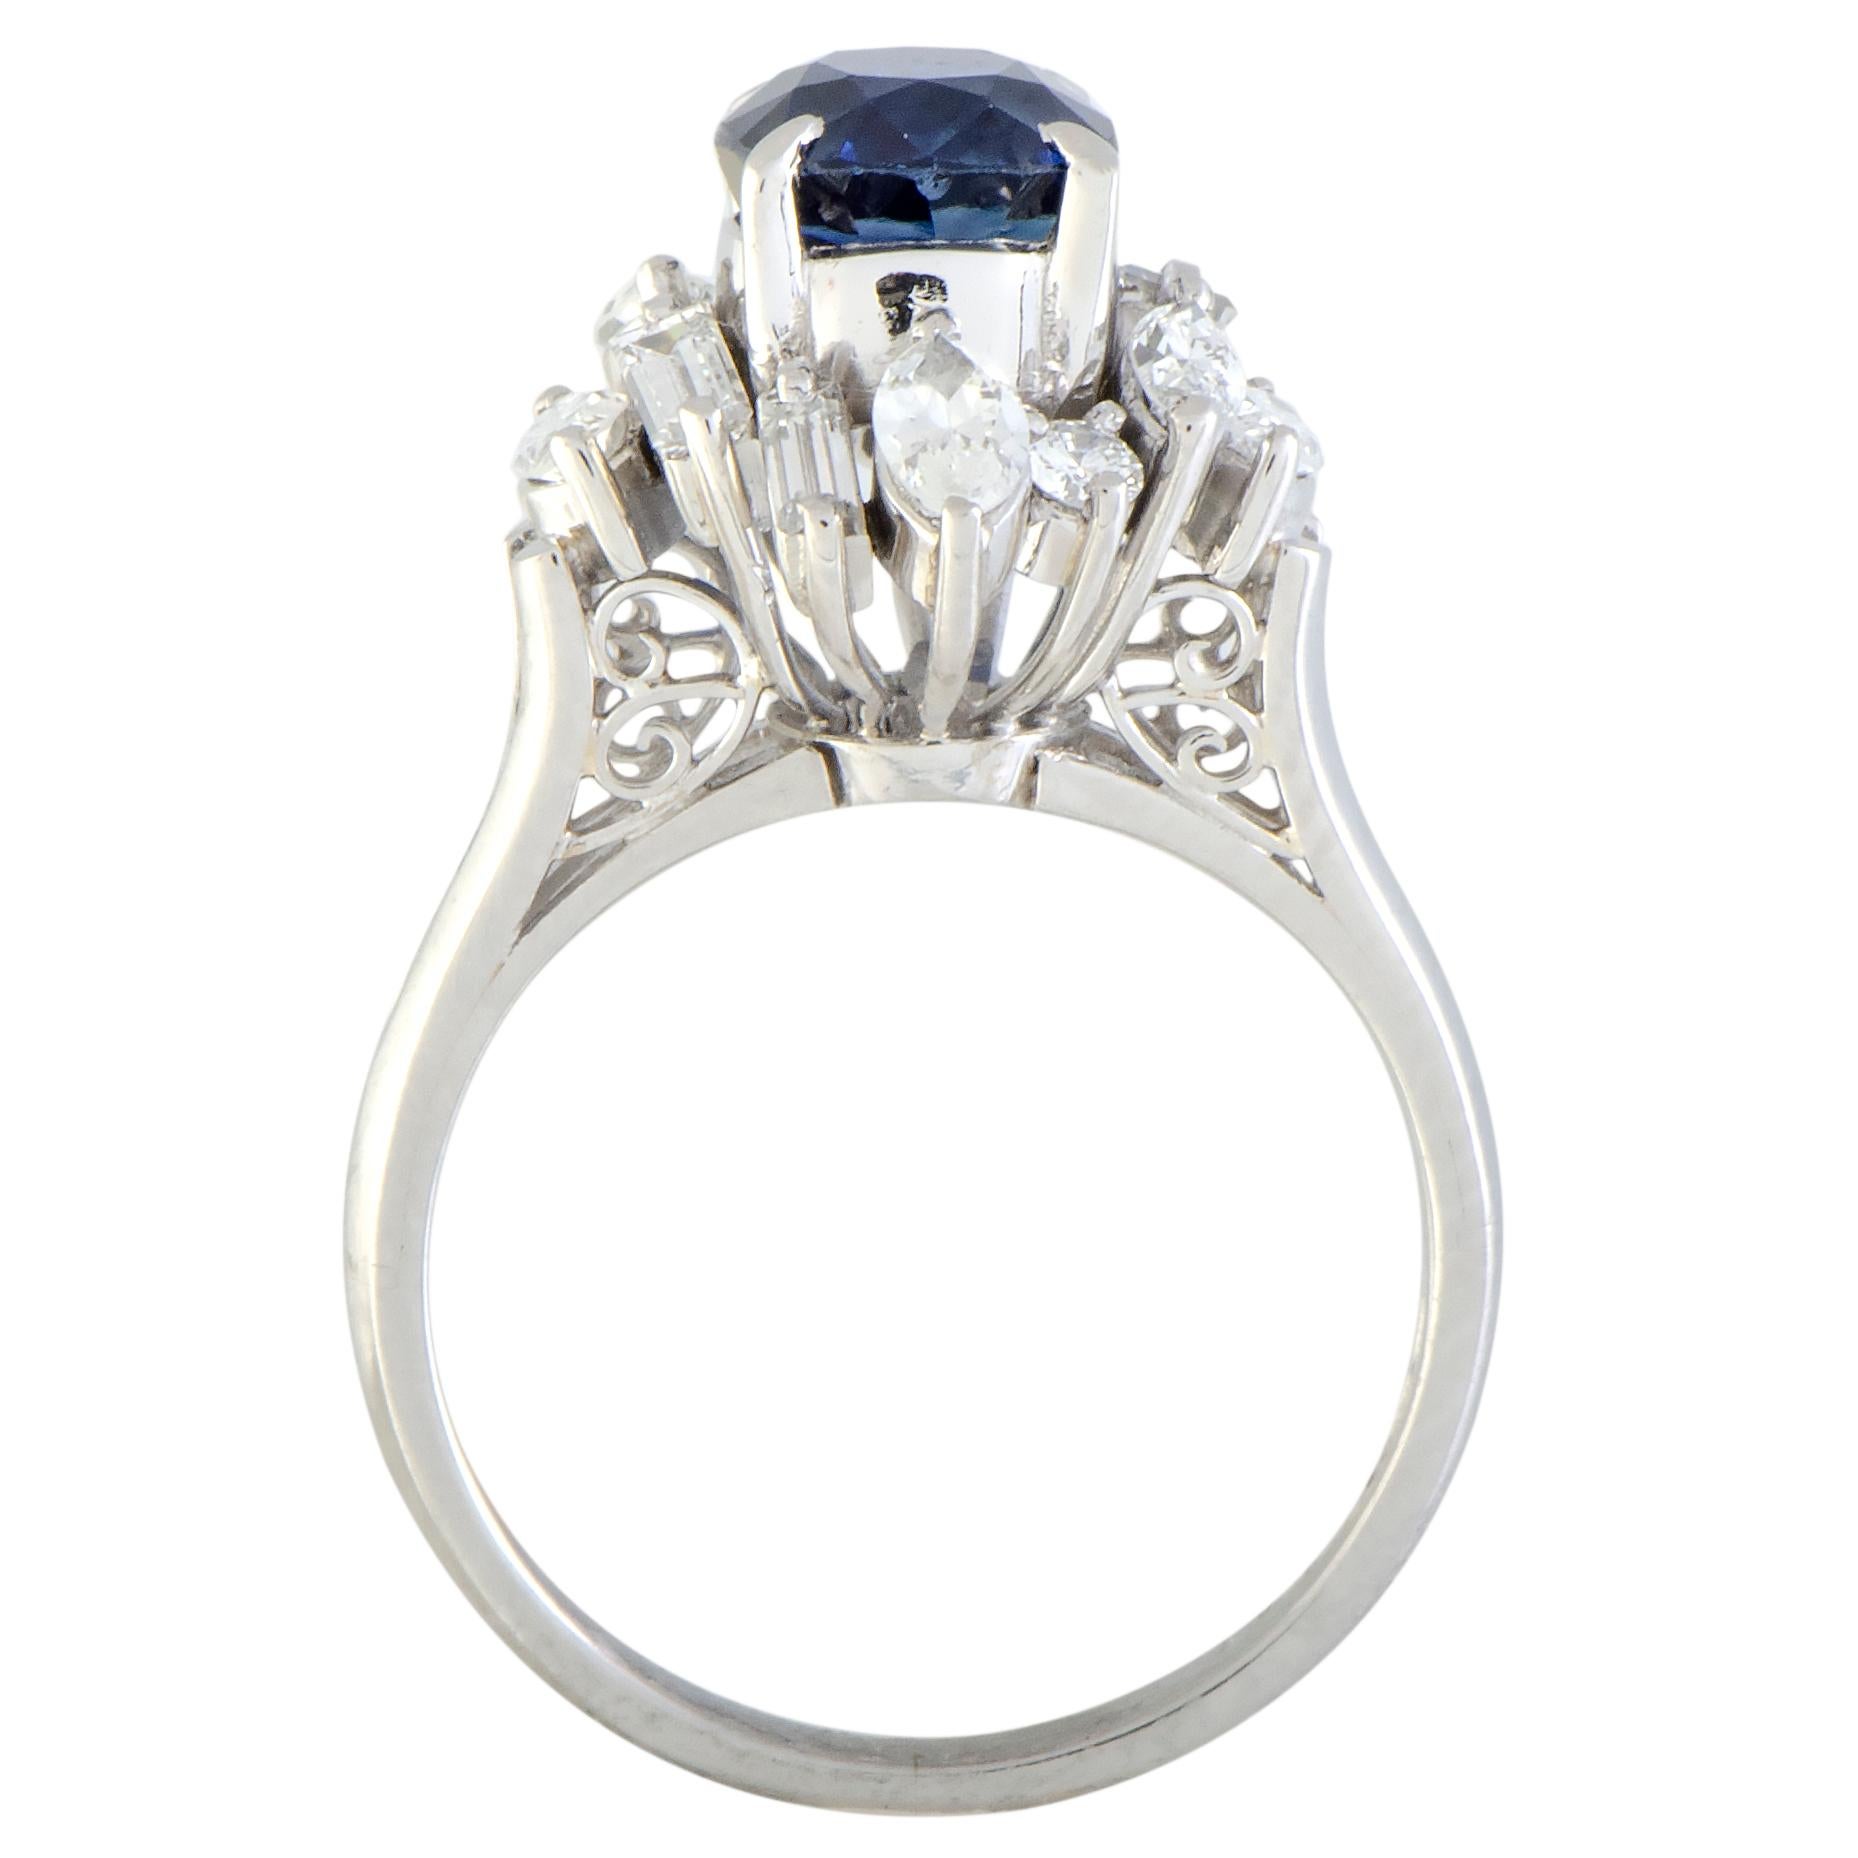 The expertly cut sapphire gives a compellingly regal appeal to this magnificent platinum ring that will elevate your style in a most refined fashion. The sapphire weighs 1.40 carats and it is accentuated by resplendent, diversely cut diamond stones